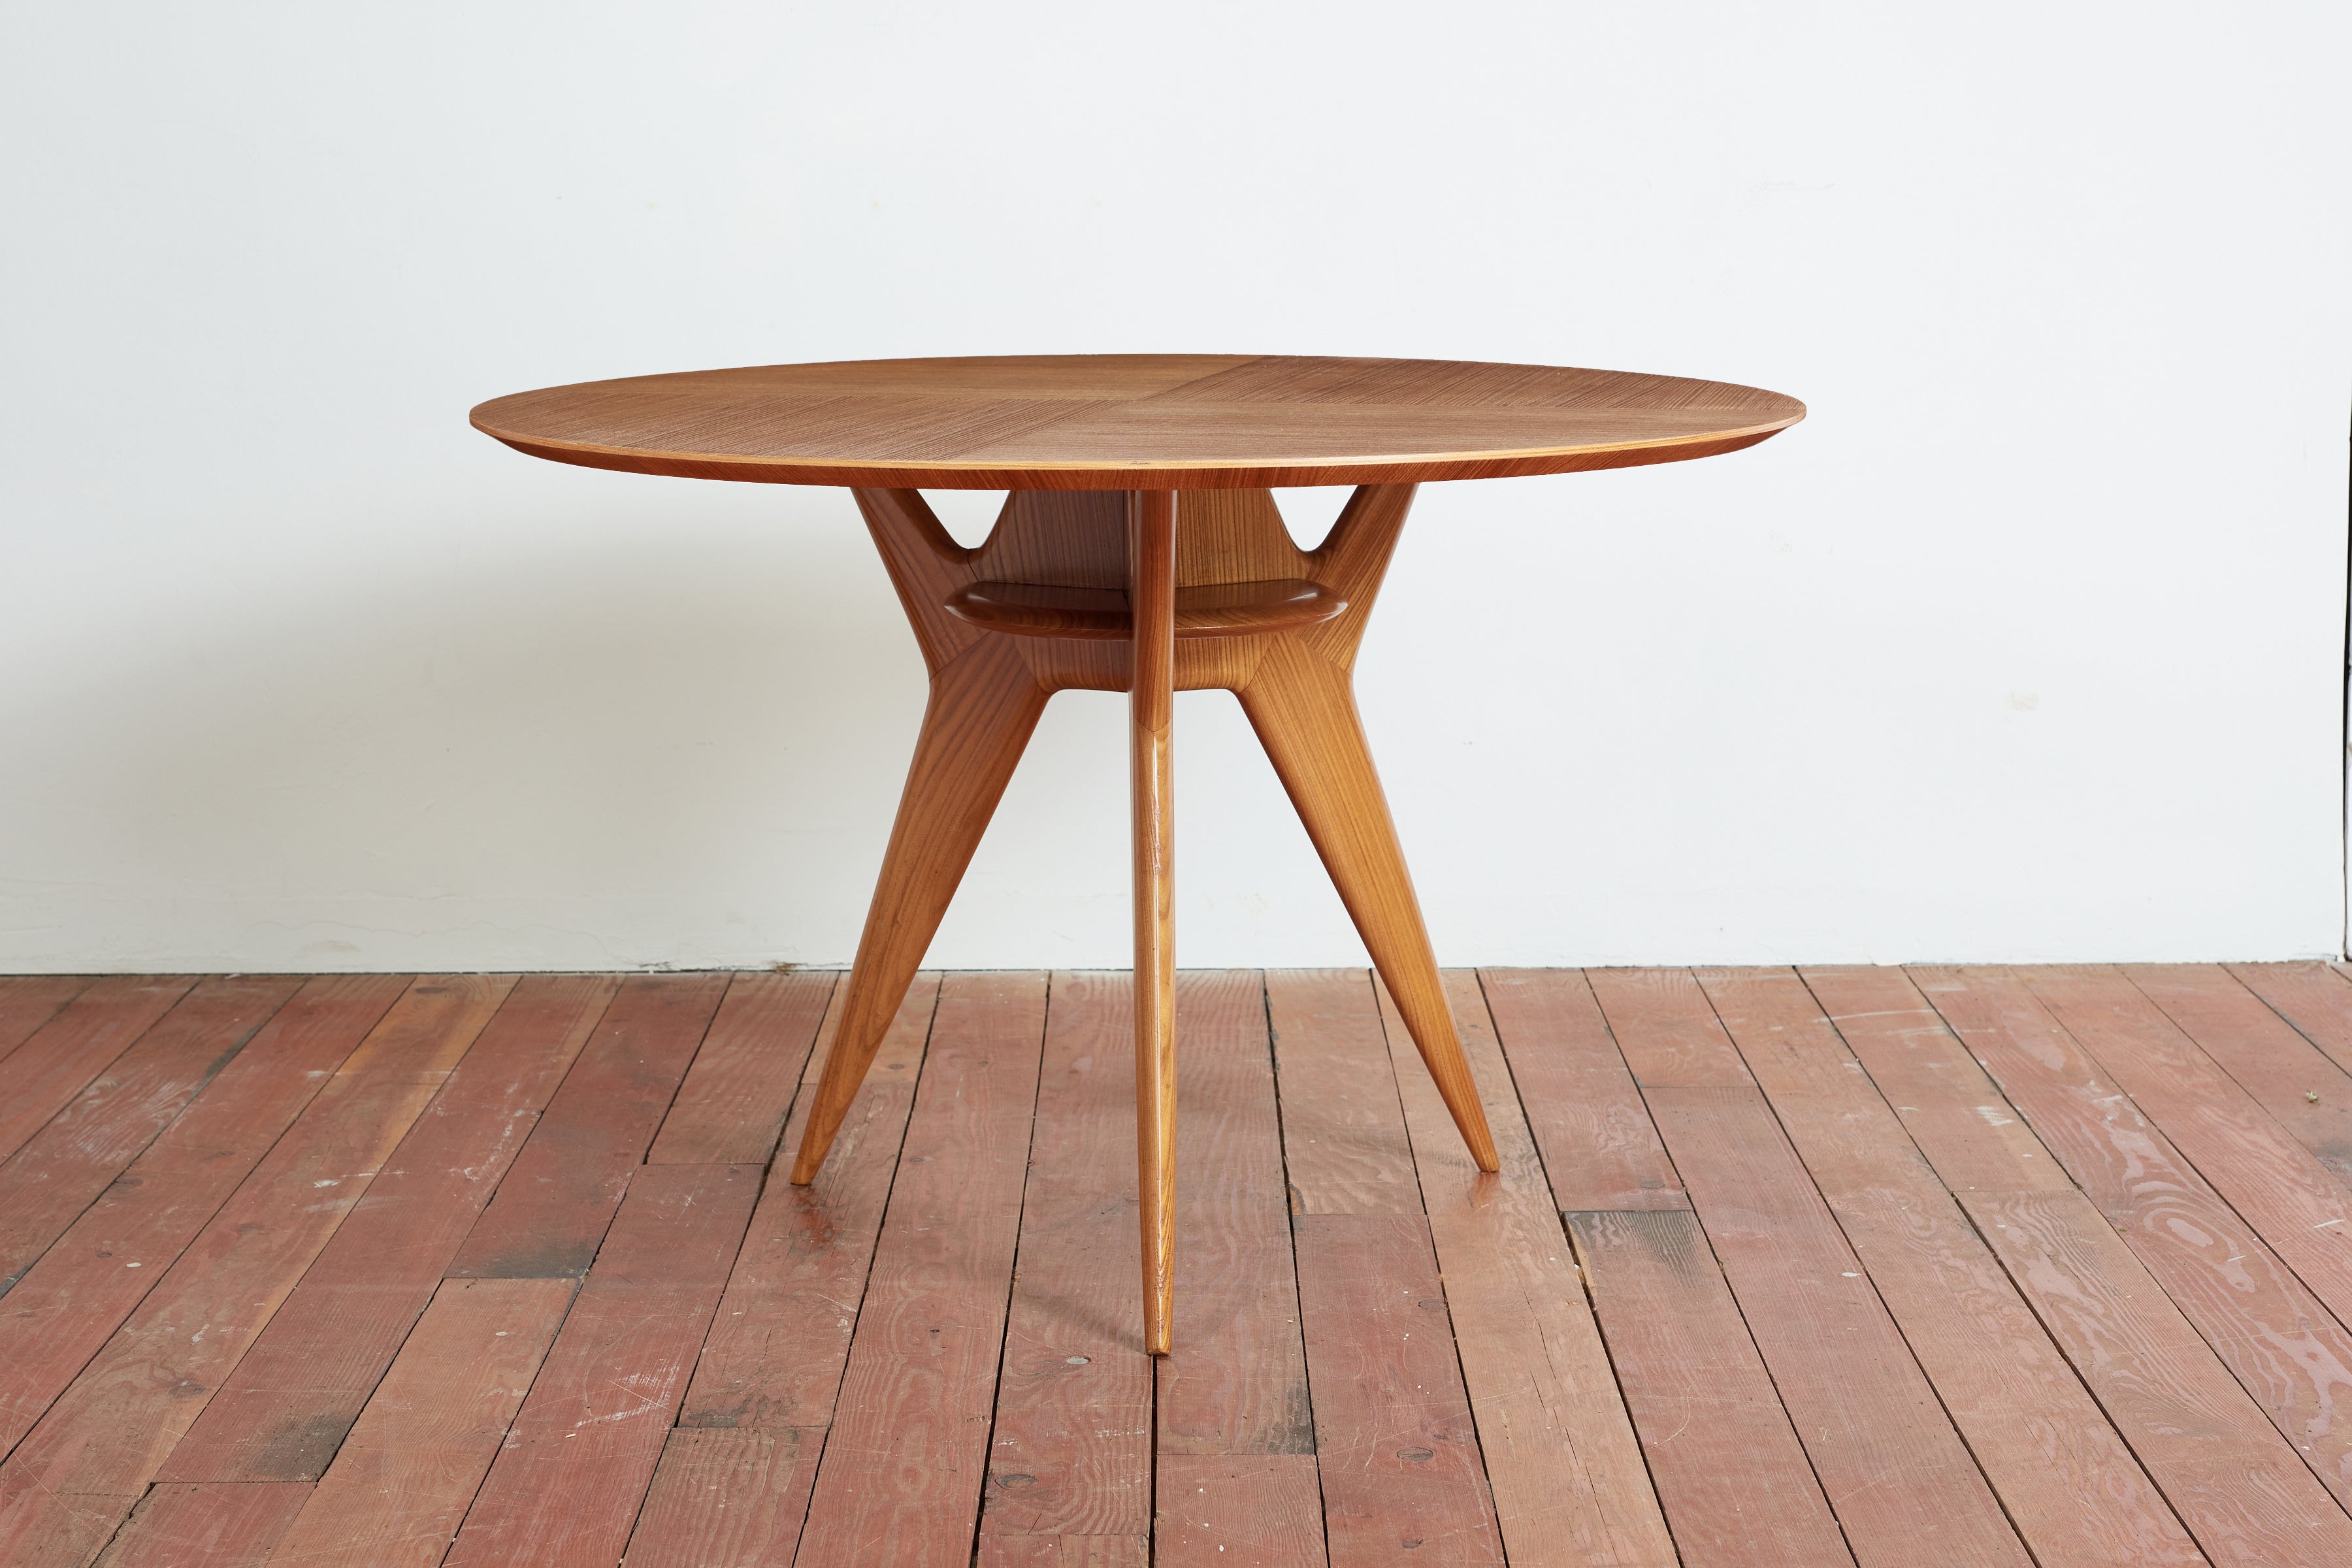 Stunning dining table attributed to Ico Parisi - Italy, 1950's 
Sculptural base with beautiful teak grain and top with directional quadrants of grain
Beautiful piece. 